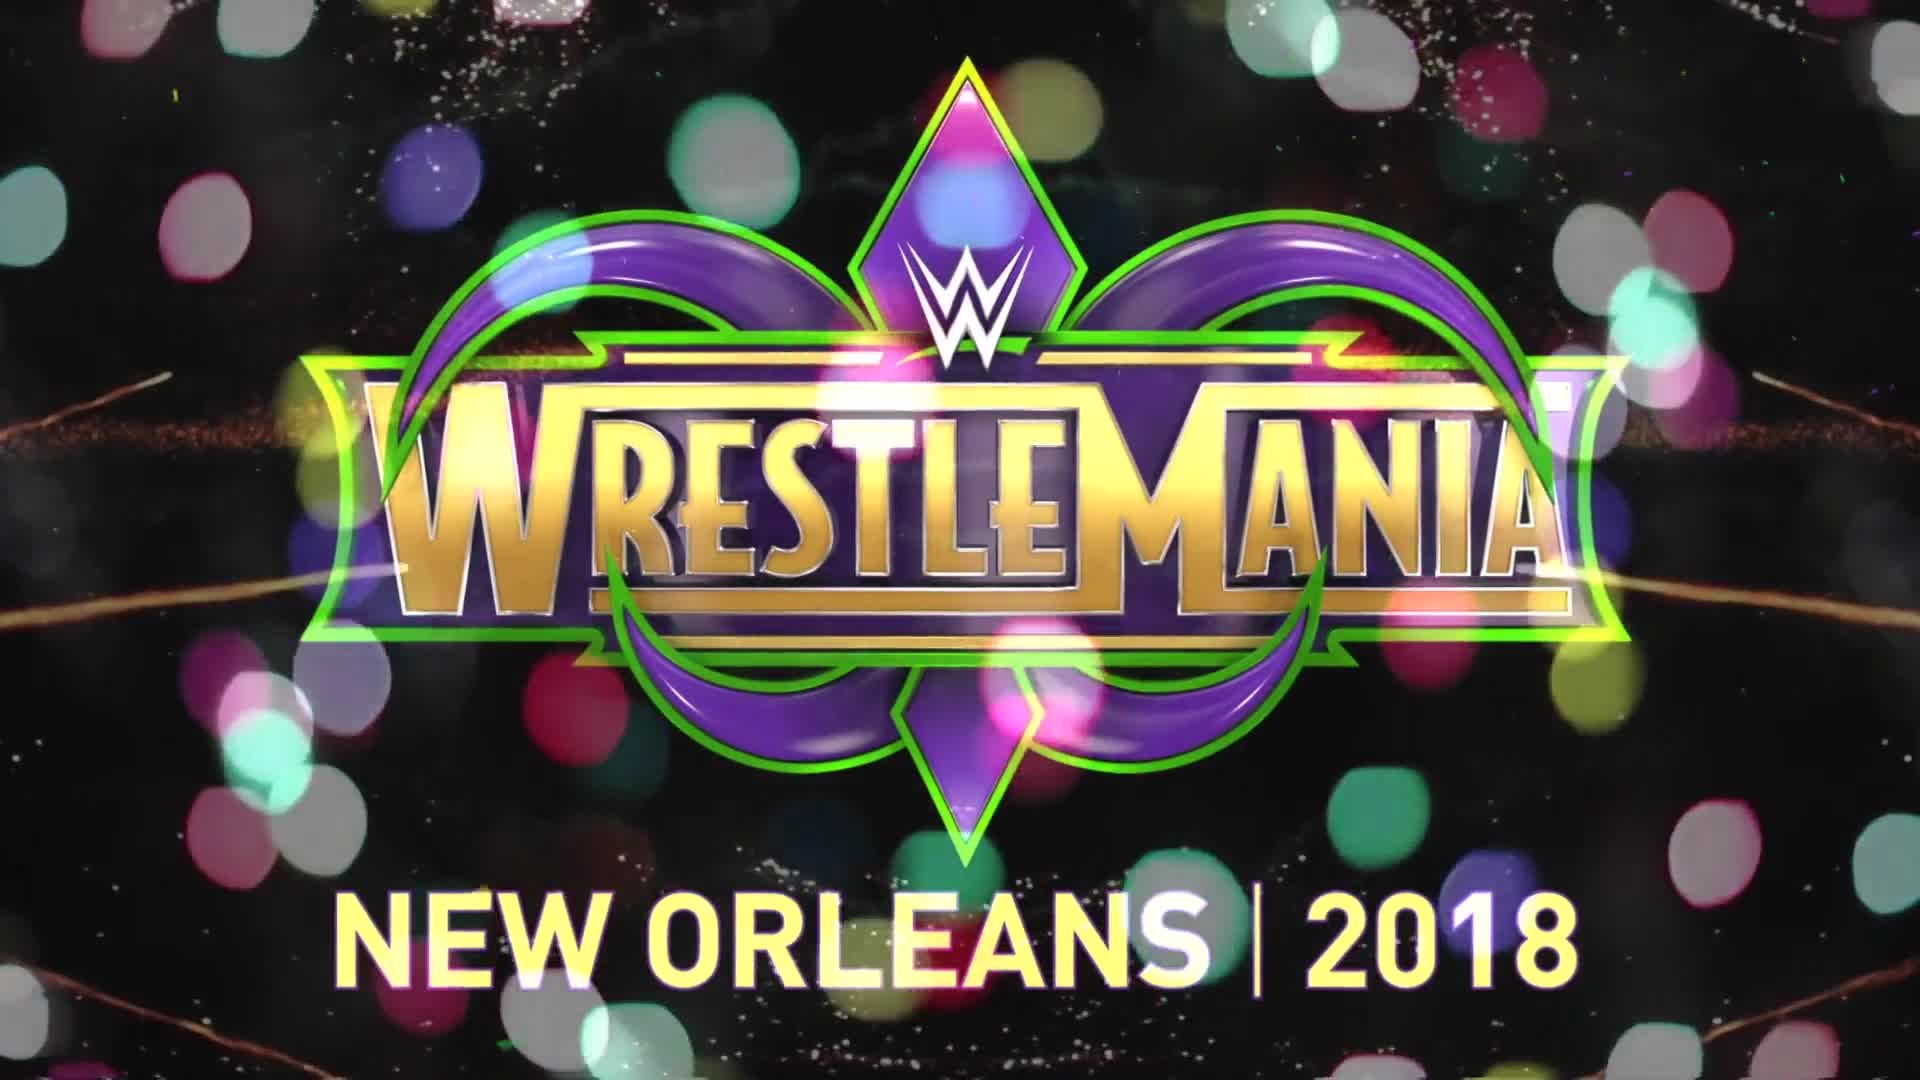 1920x1080 WrestleMania will return to New Orleans for its 34th edition in April 2018,  WWE has